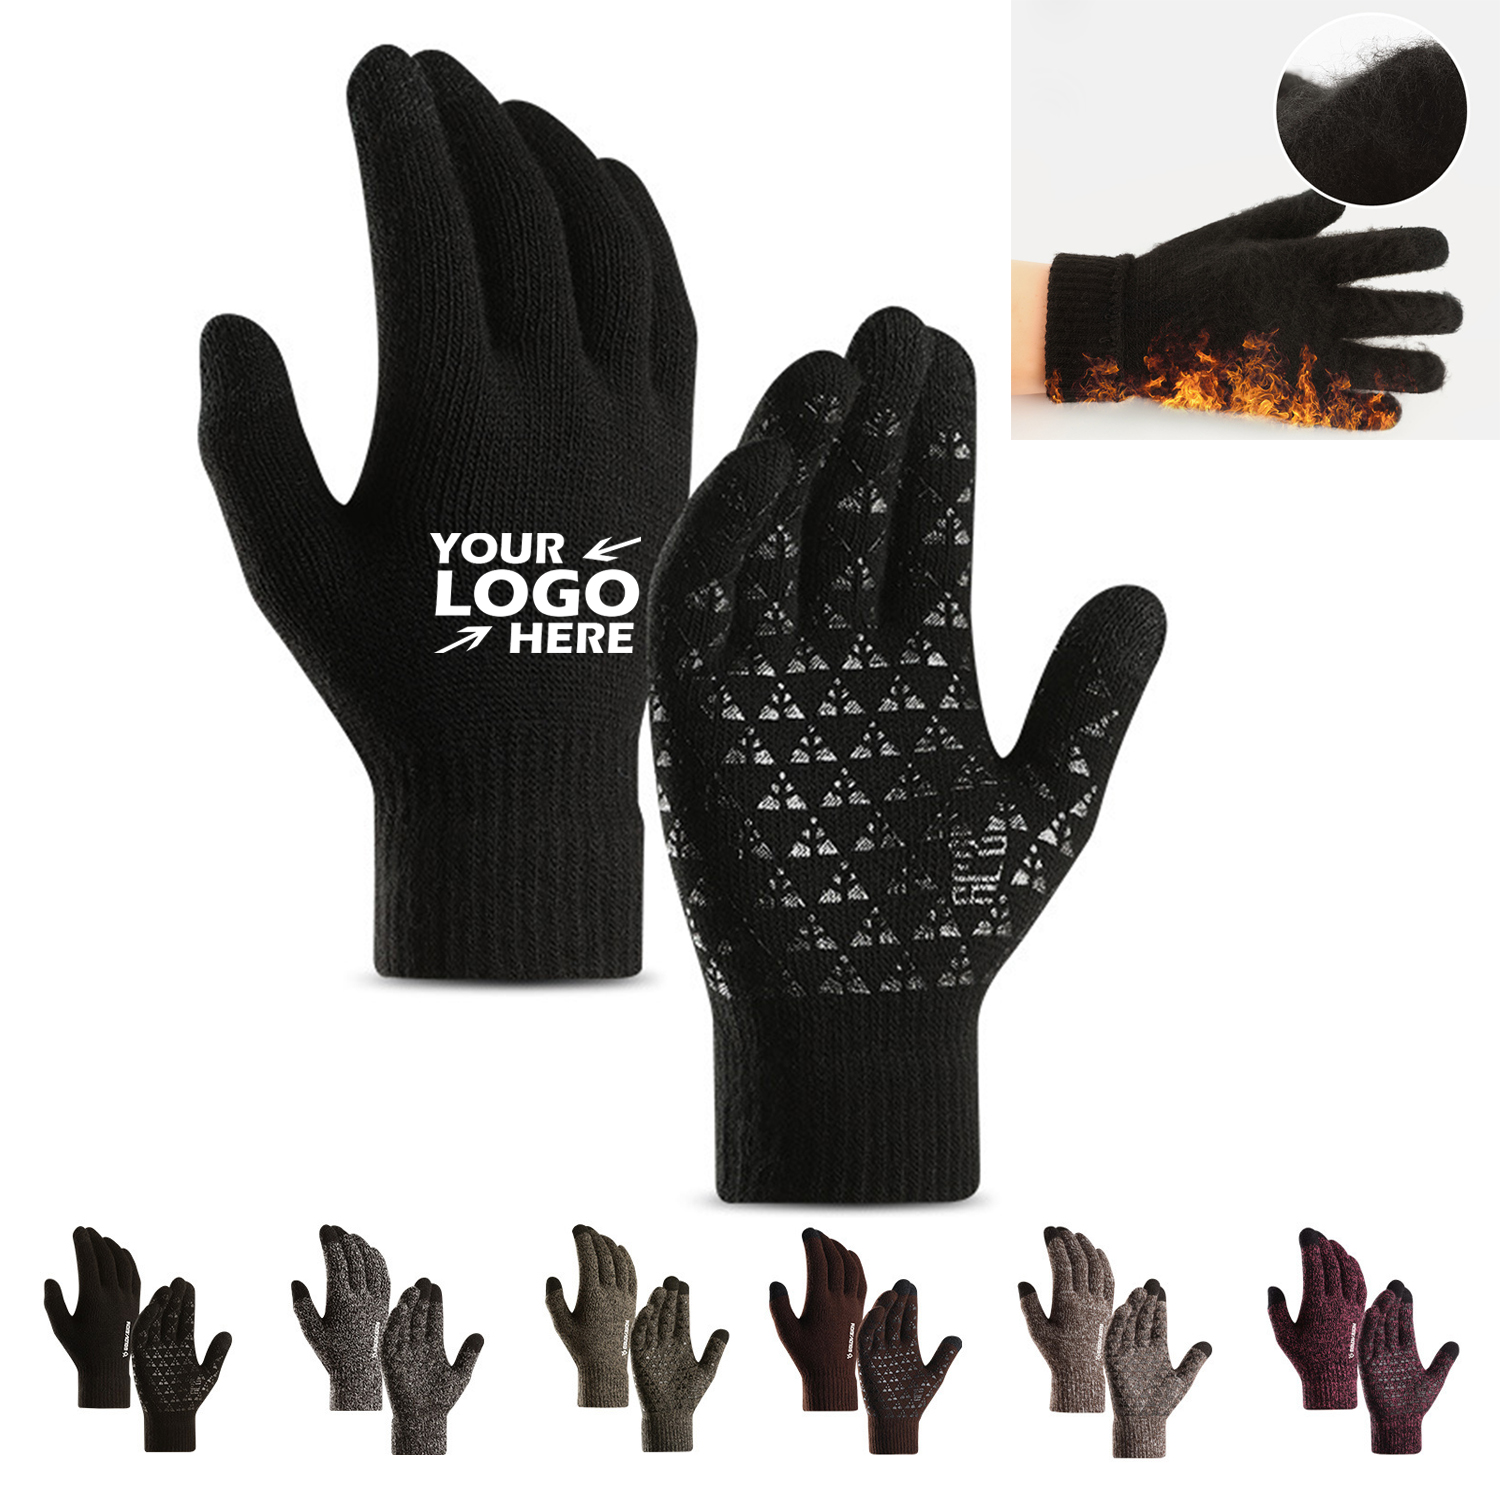 GL-SVH1023 Knitted Warm Winter Touch Screen Gloves